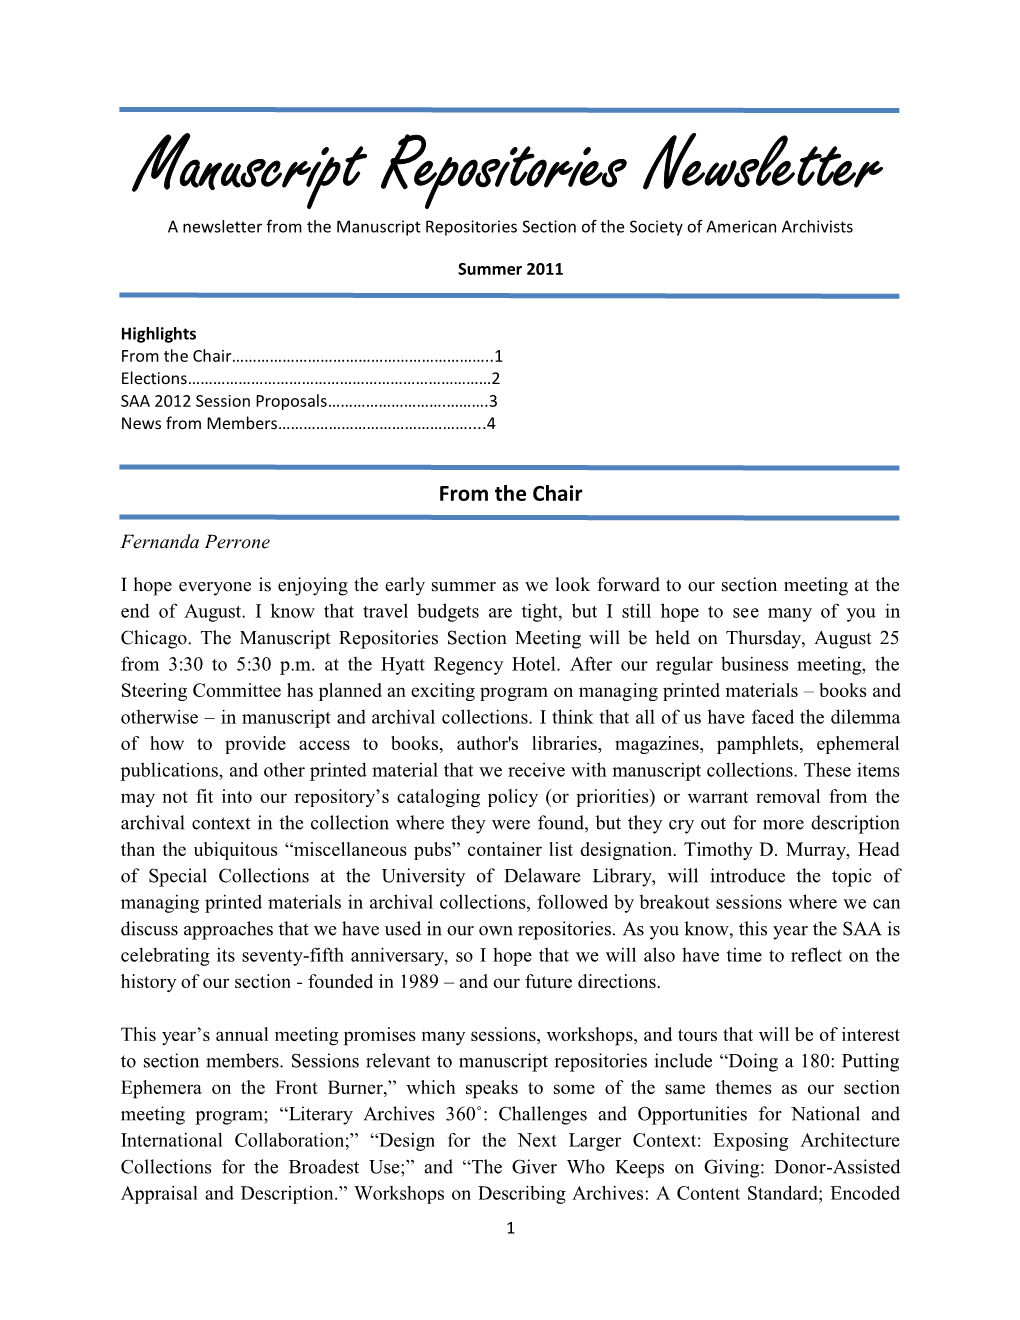 Manuscript Repositories Newsletter a Newsletter from the Manuscript Repositories Section of the Society of American Archivists